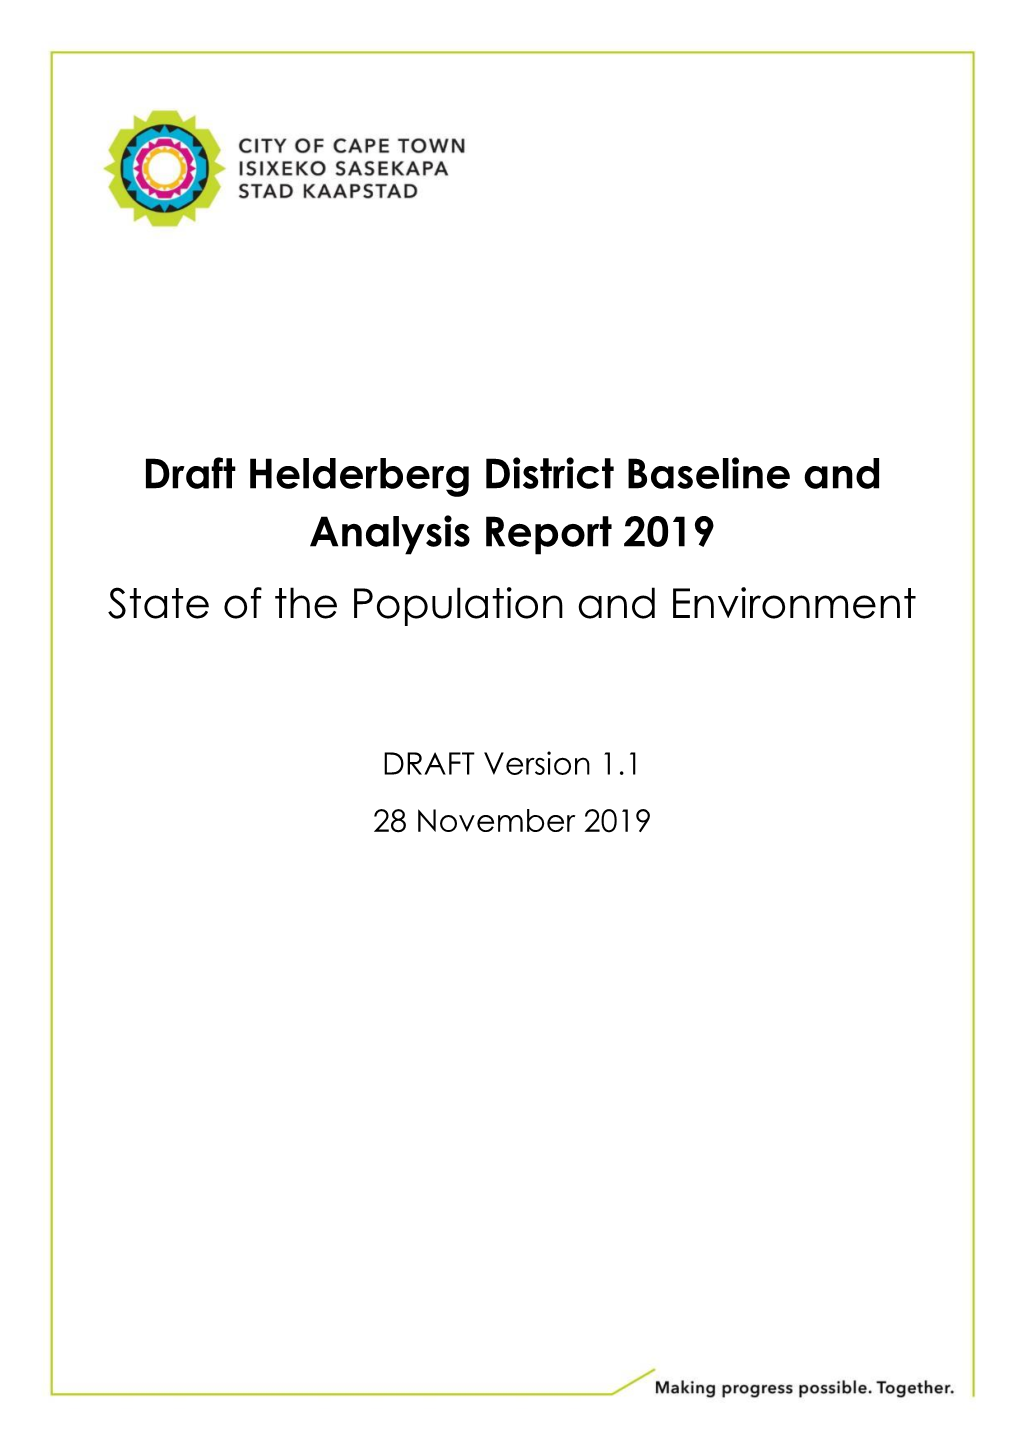 Draft Helderberg District Baseline and Analysis Report 2019 State of the Population and Environment